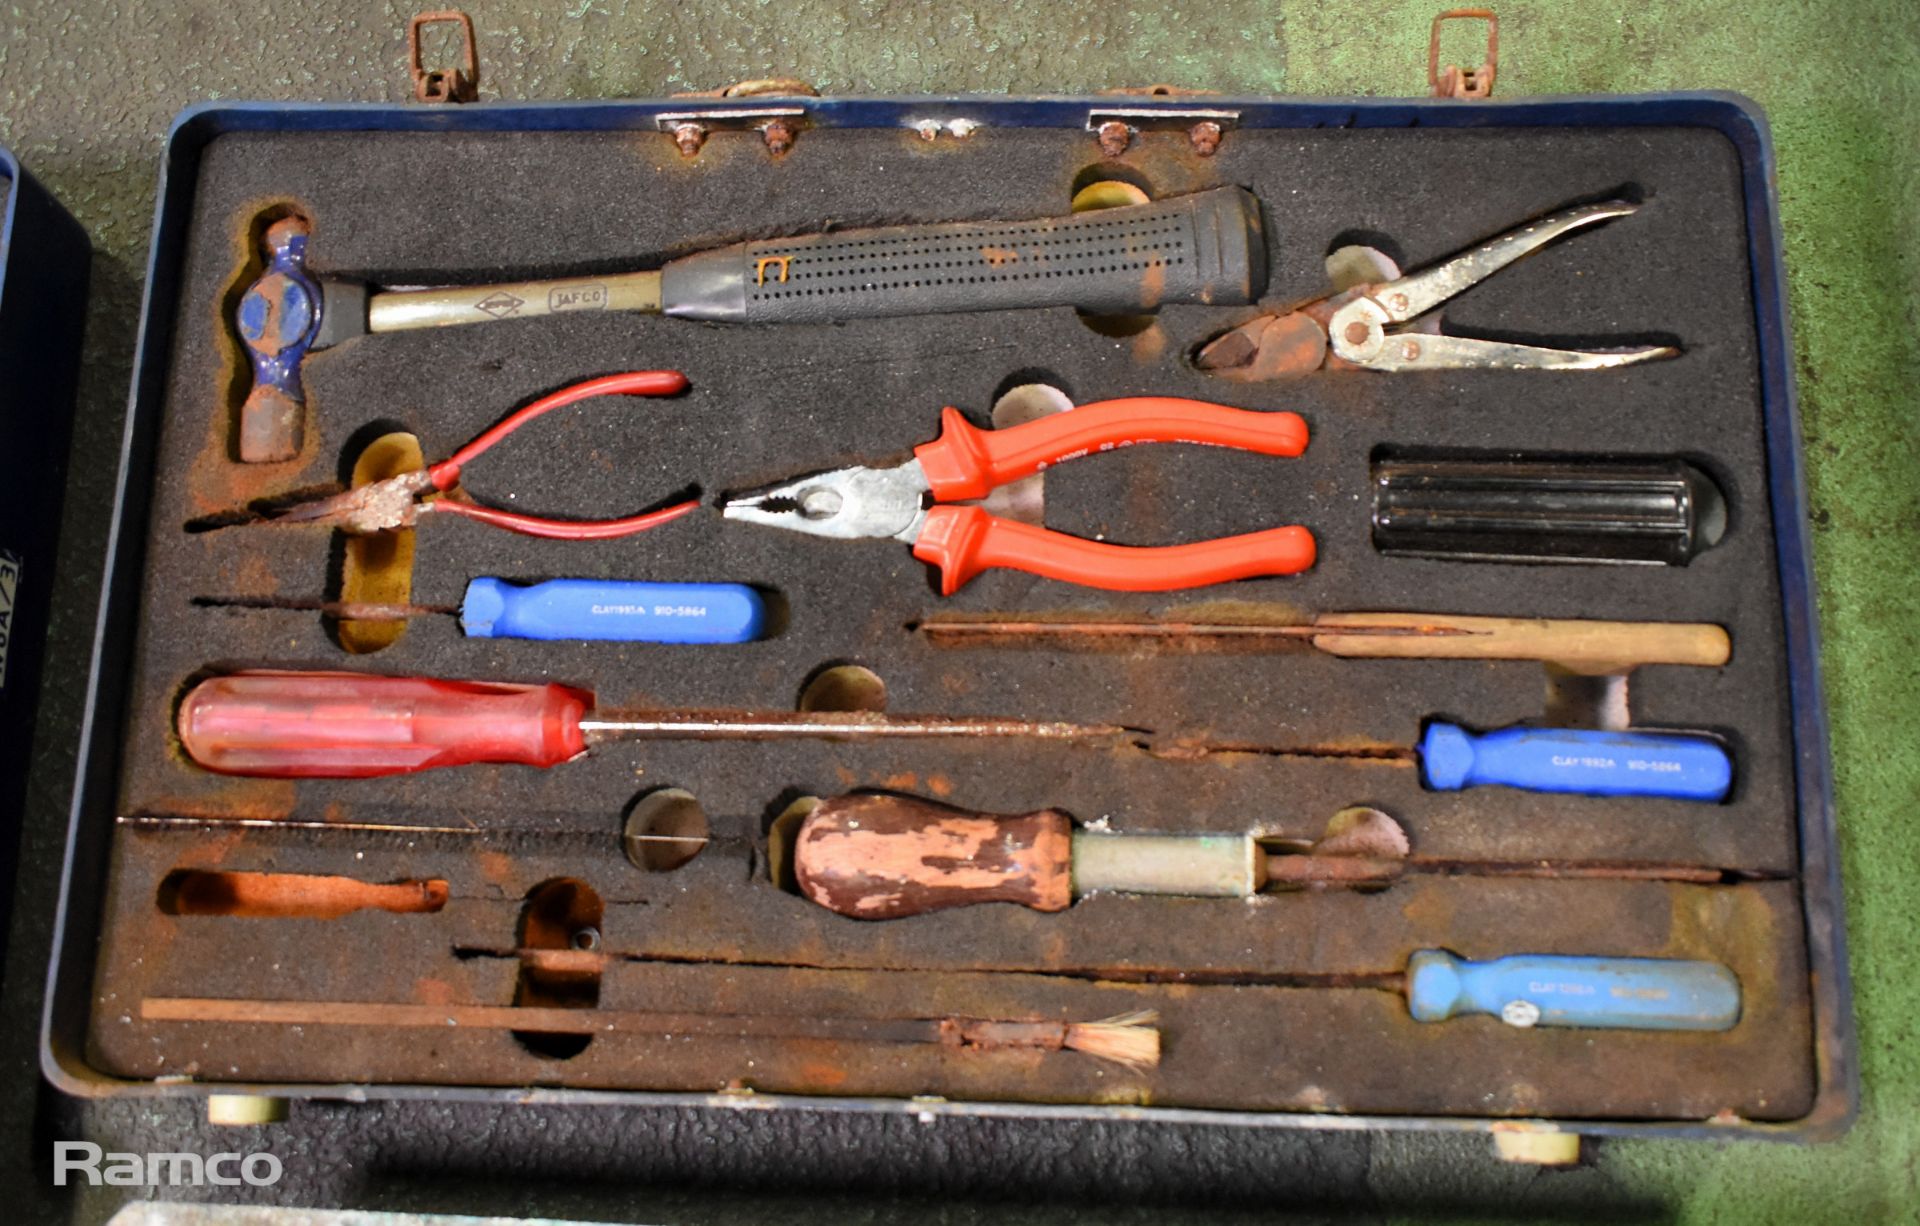 2x Multi piece tool kits in composite case - spanners, screwdrivers, allen keys, hammer and pliers - Image 4 of 7